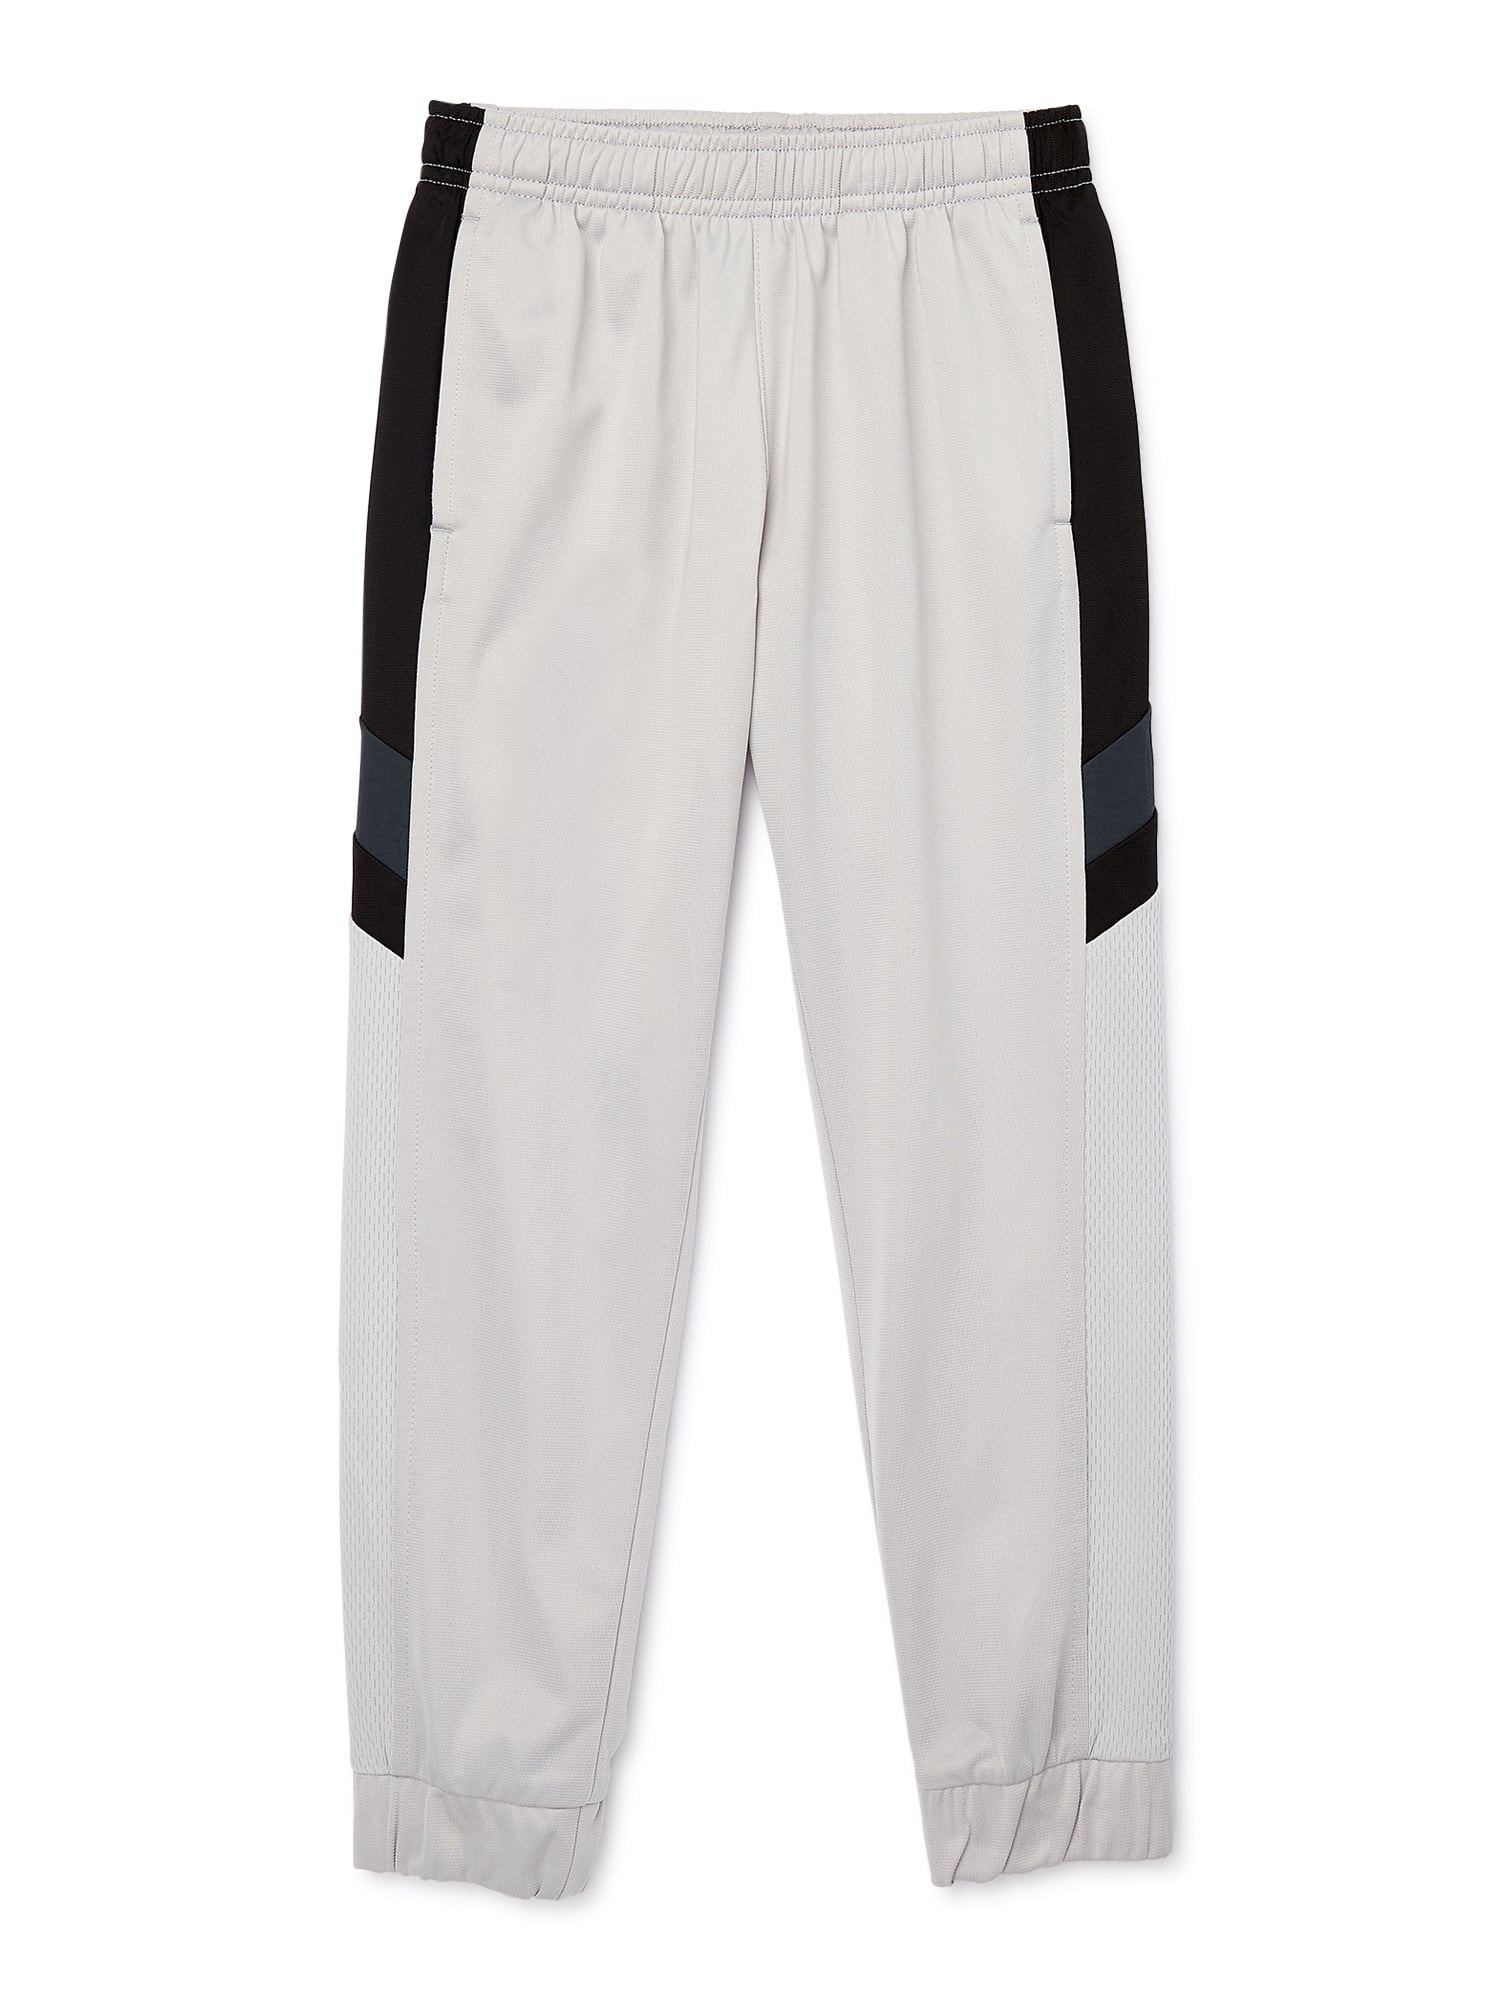 Athletic Works Boys Tricot Joggers, Sizes 4-18 & Husky 